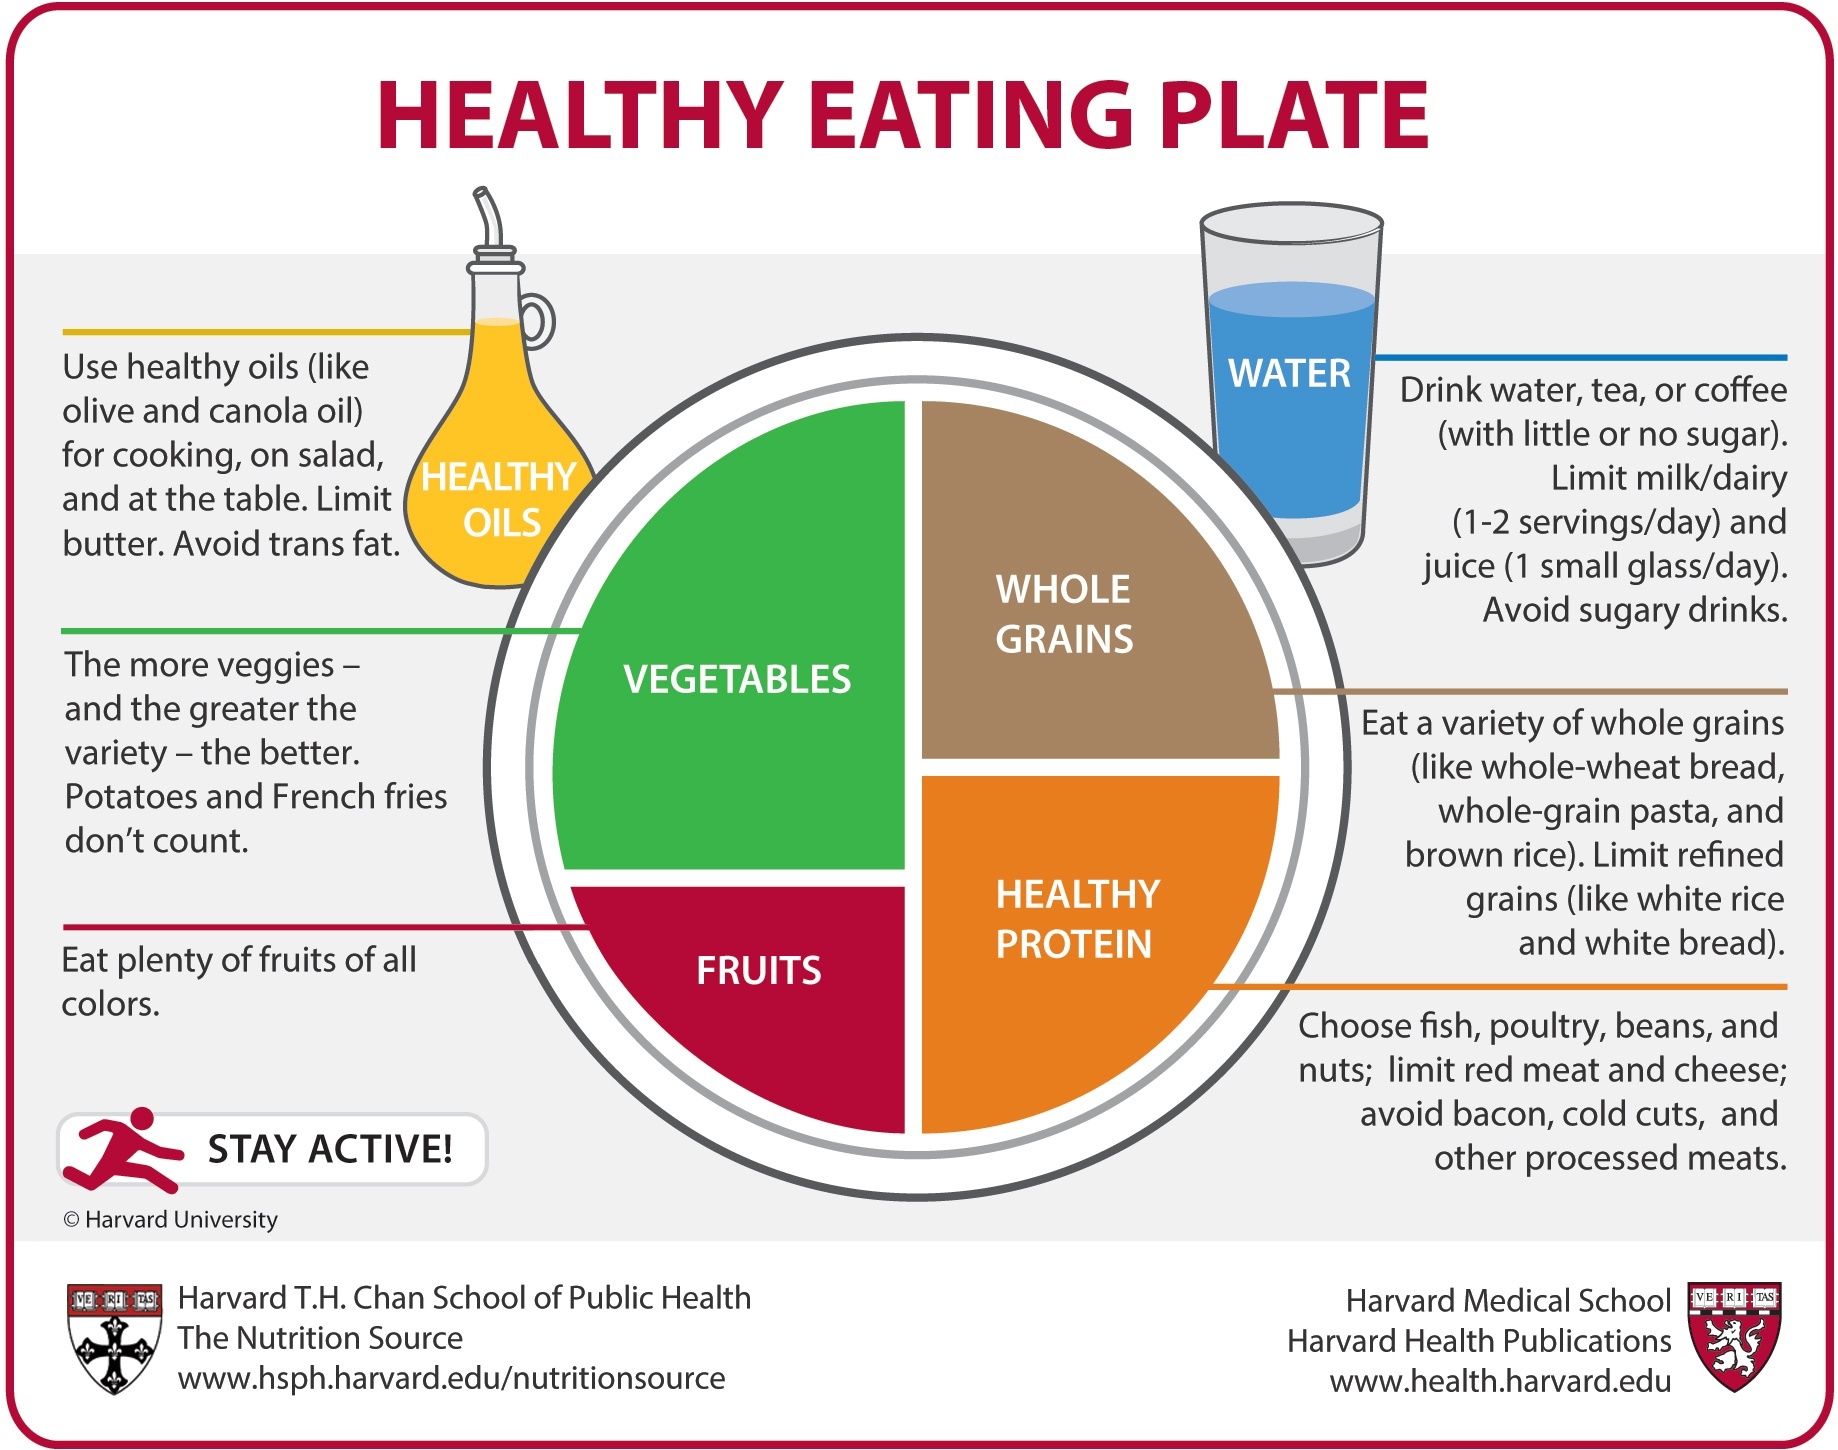 A plate is shown which is divided into 4 parts. Half of the plate is Fruits and Vegetables (with the vegetables being a larger segment). And the other half is grains and protein, with the protein being a slightly larger segment. Water and a bottle of oil is shown on the side. The guide also specifies to eat a variety of vegetables (potatoes and French fries don't count); use healthy oils like olive and canola oil; limit dairy to 1-2 servings a day; eat a variety of whole grains; limit red meat, cheese, avoid bacon, cold cuts, and other processed meats.